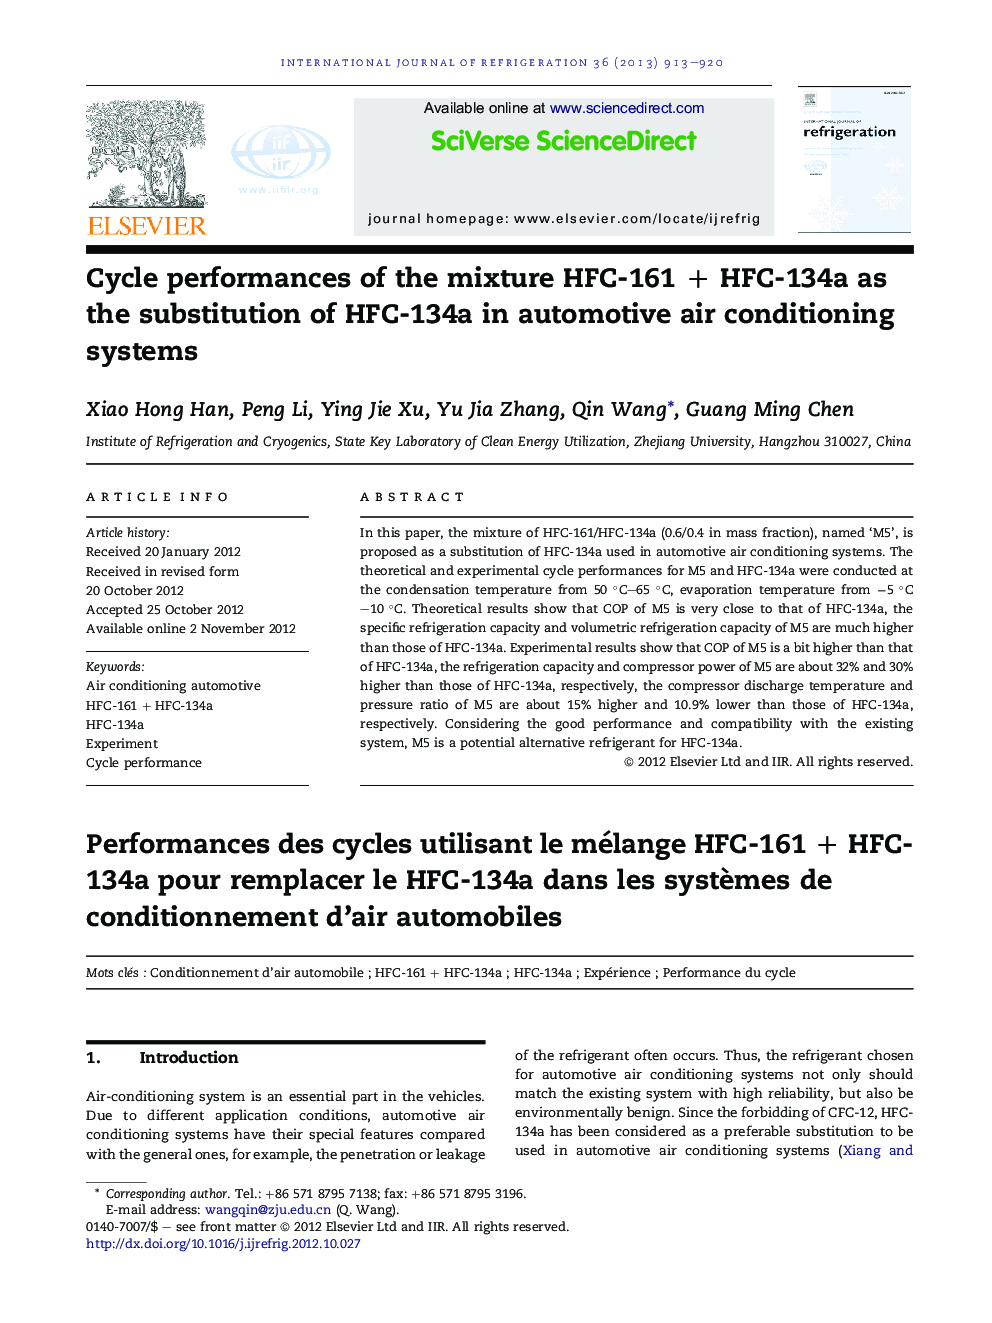 Cycle performances of the mixture HFC-161 + HFC-134a as the substitution of HFC-134a in automotive air conditioning systems